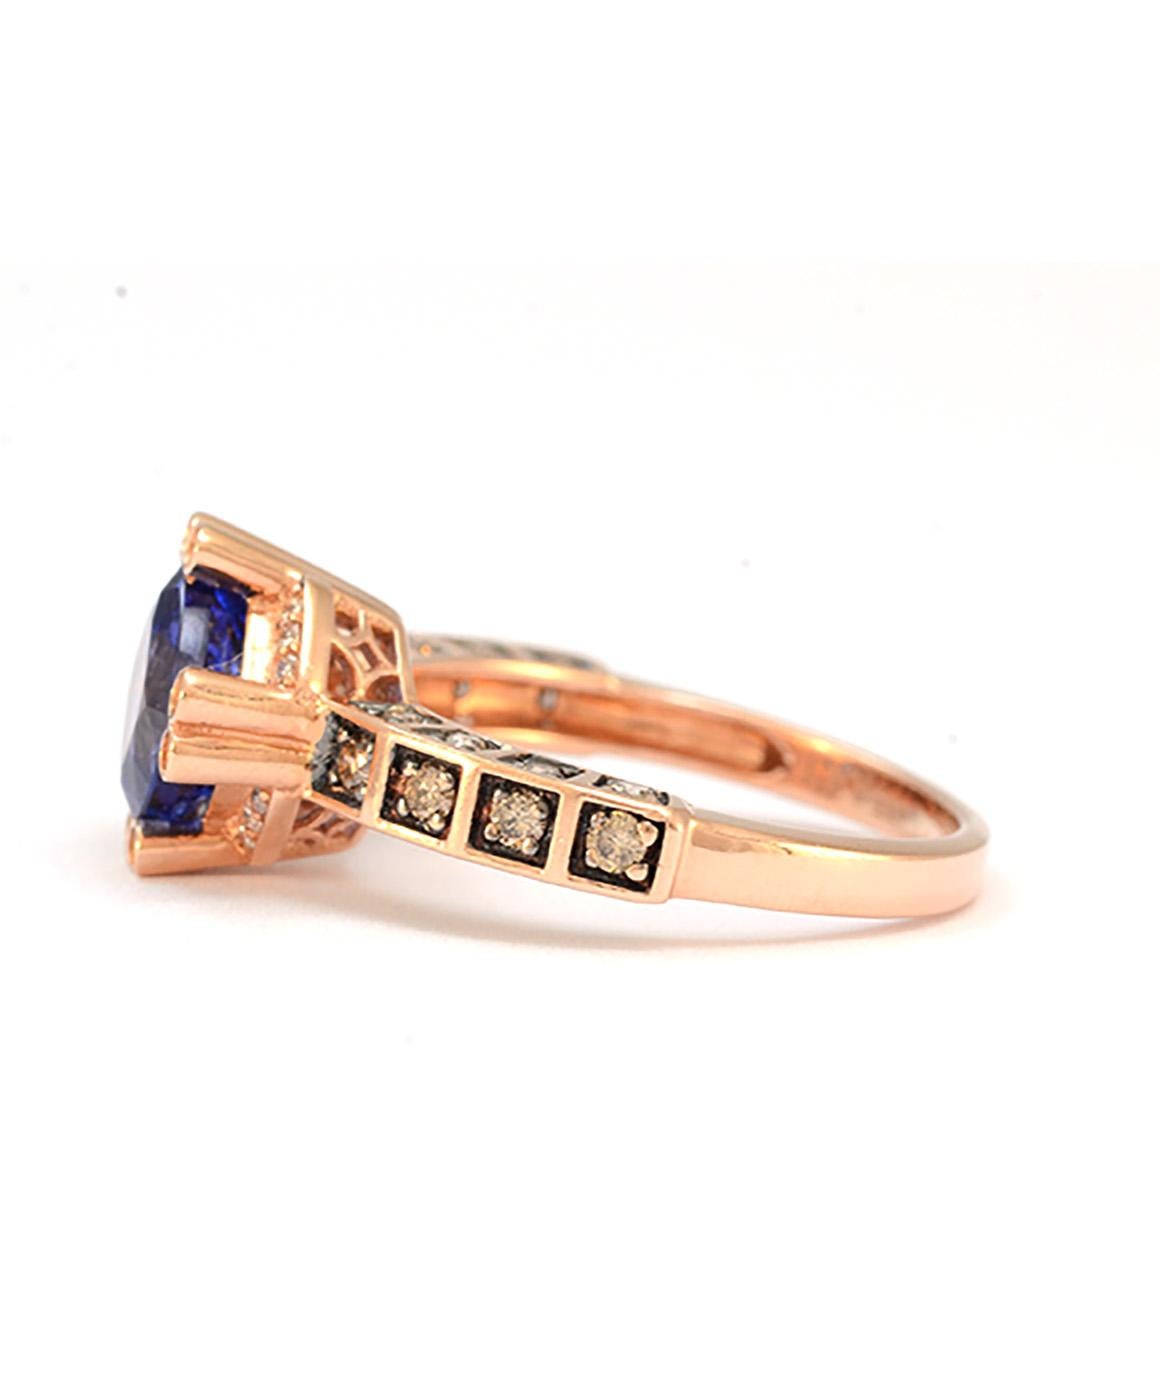 100% Authentic 14K Rose Gold LeVian Tanzanite & Diamond Ring! With Certification. This beautiful ring comes with the registered information. The ring has 44 round diamonds approximately 1/2cts. Diamond color, (H-I) (BRN) clarity (SI1-2)(VS-SI). And